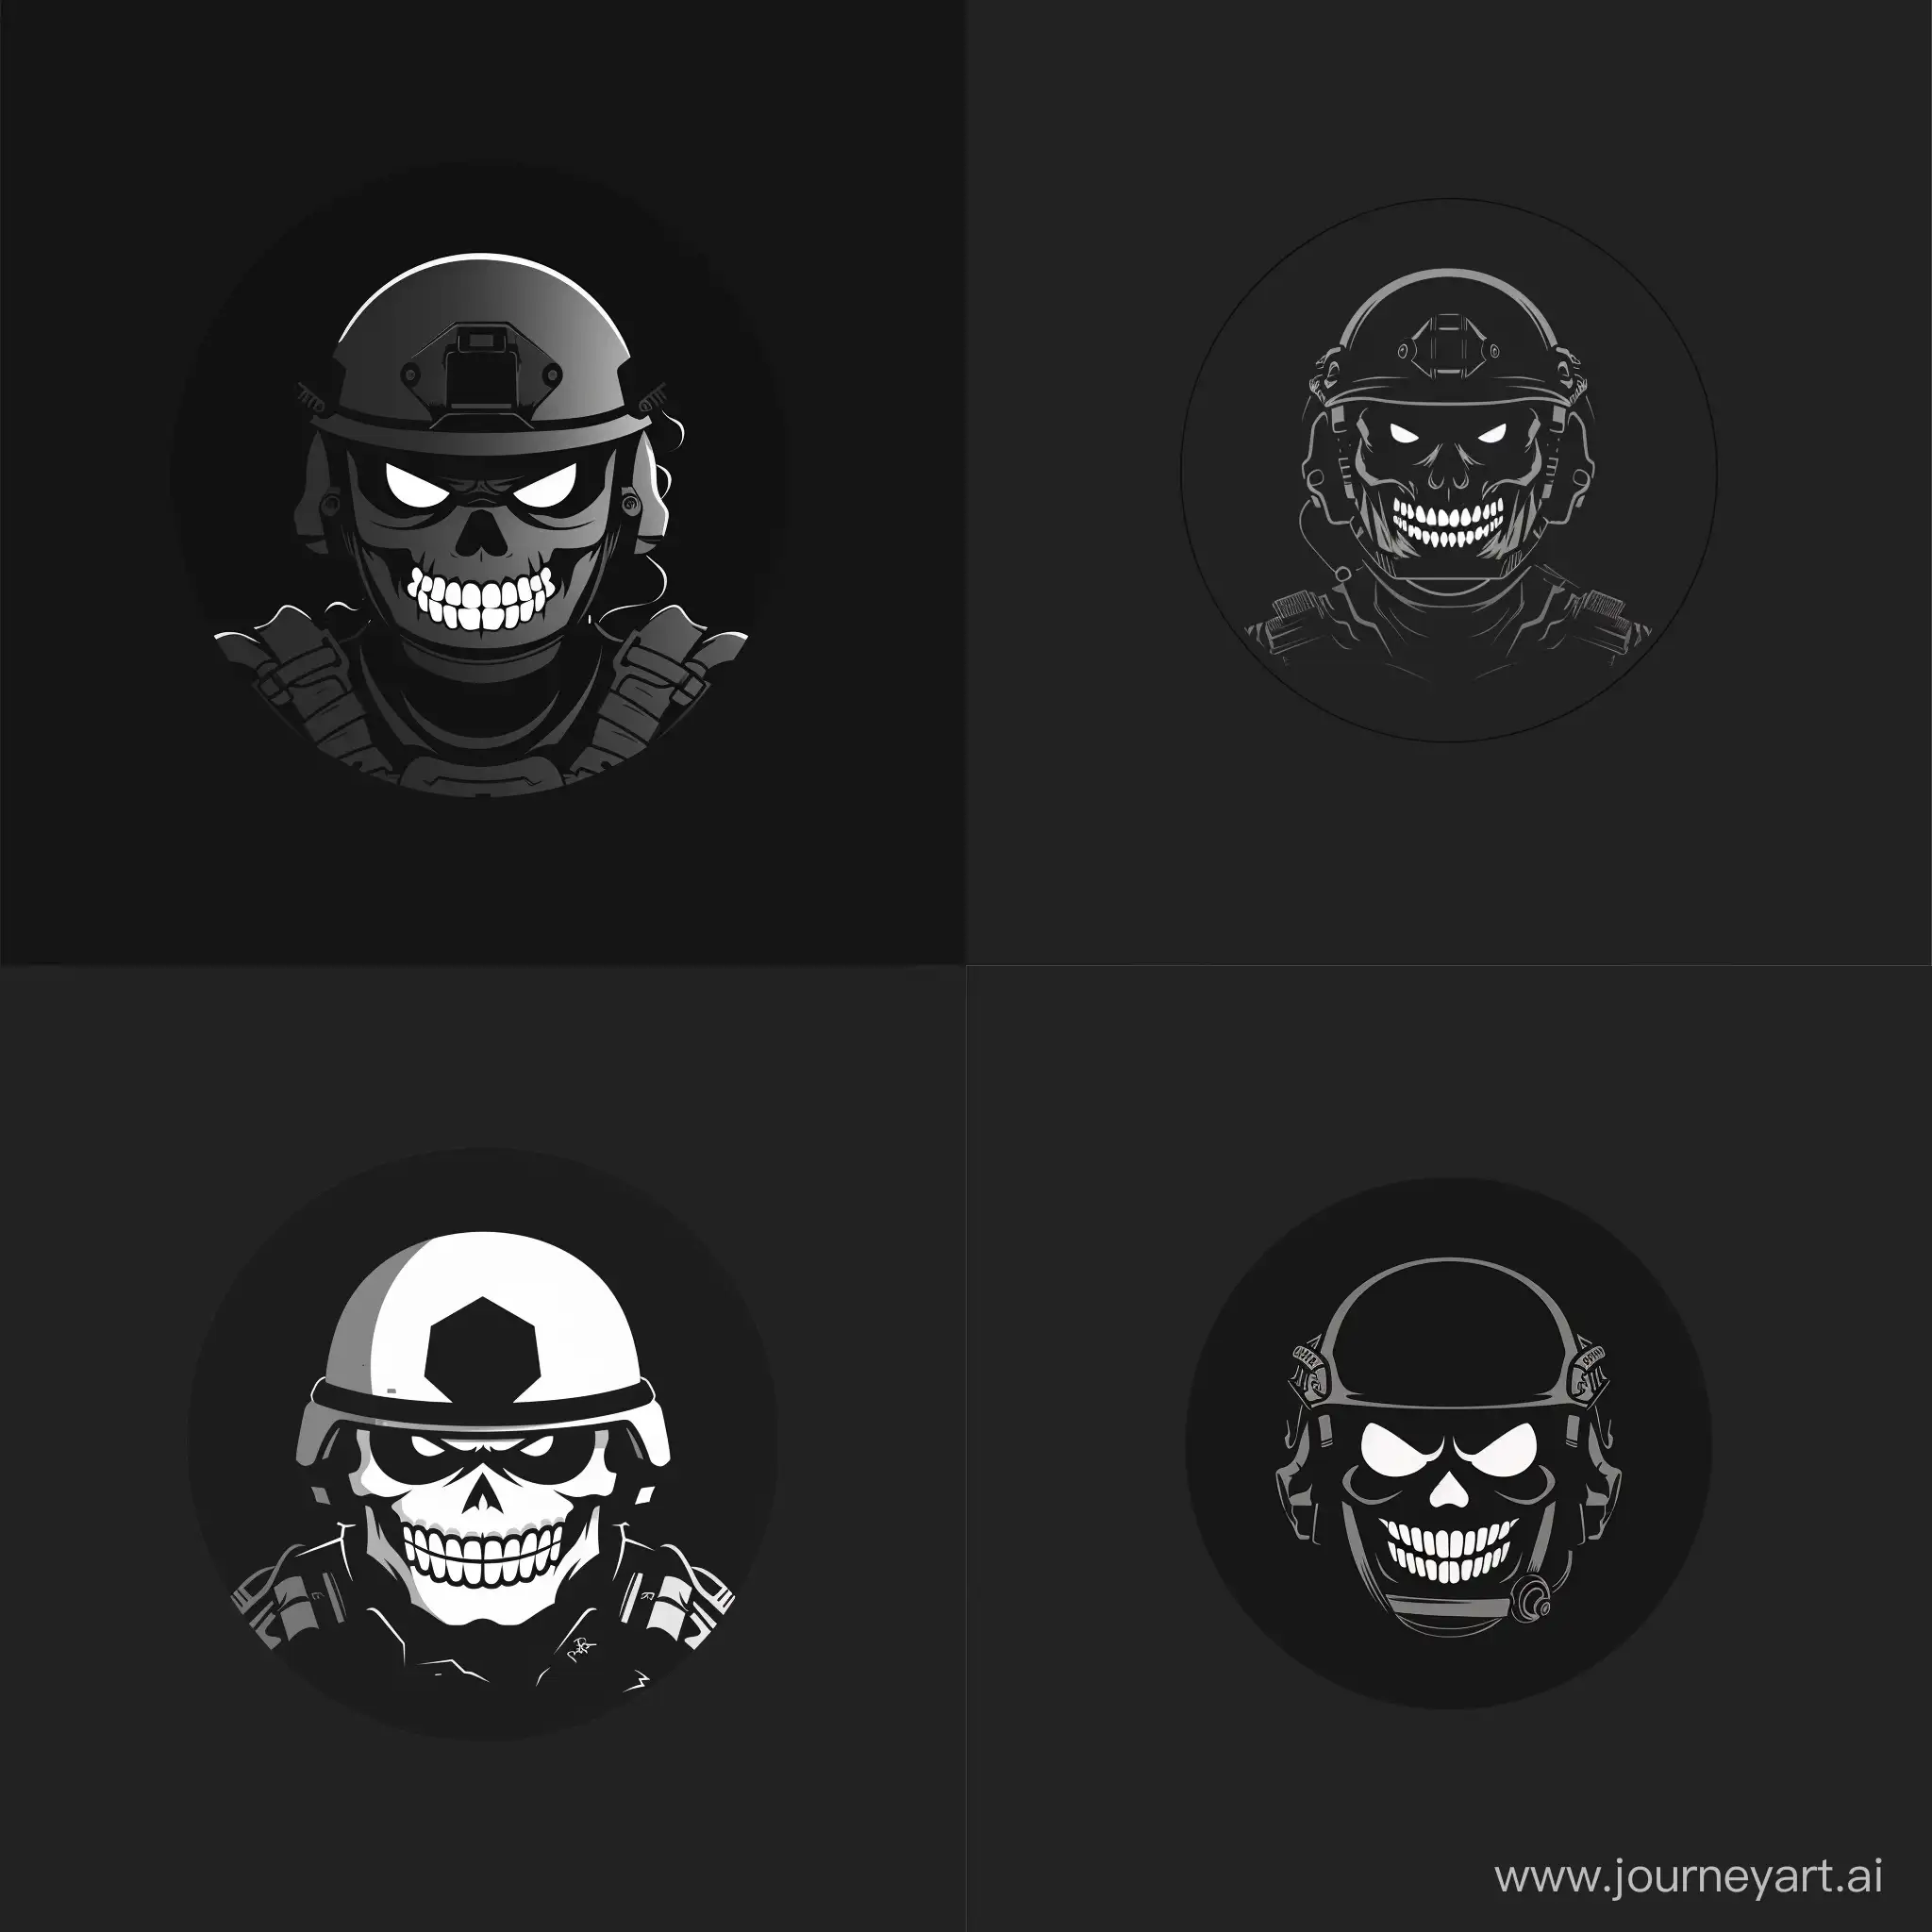 Modern-Military-Madness-Angry-Smile-and-Skull-Mask-in-Minimalistic-Design